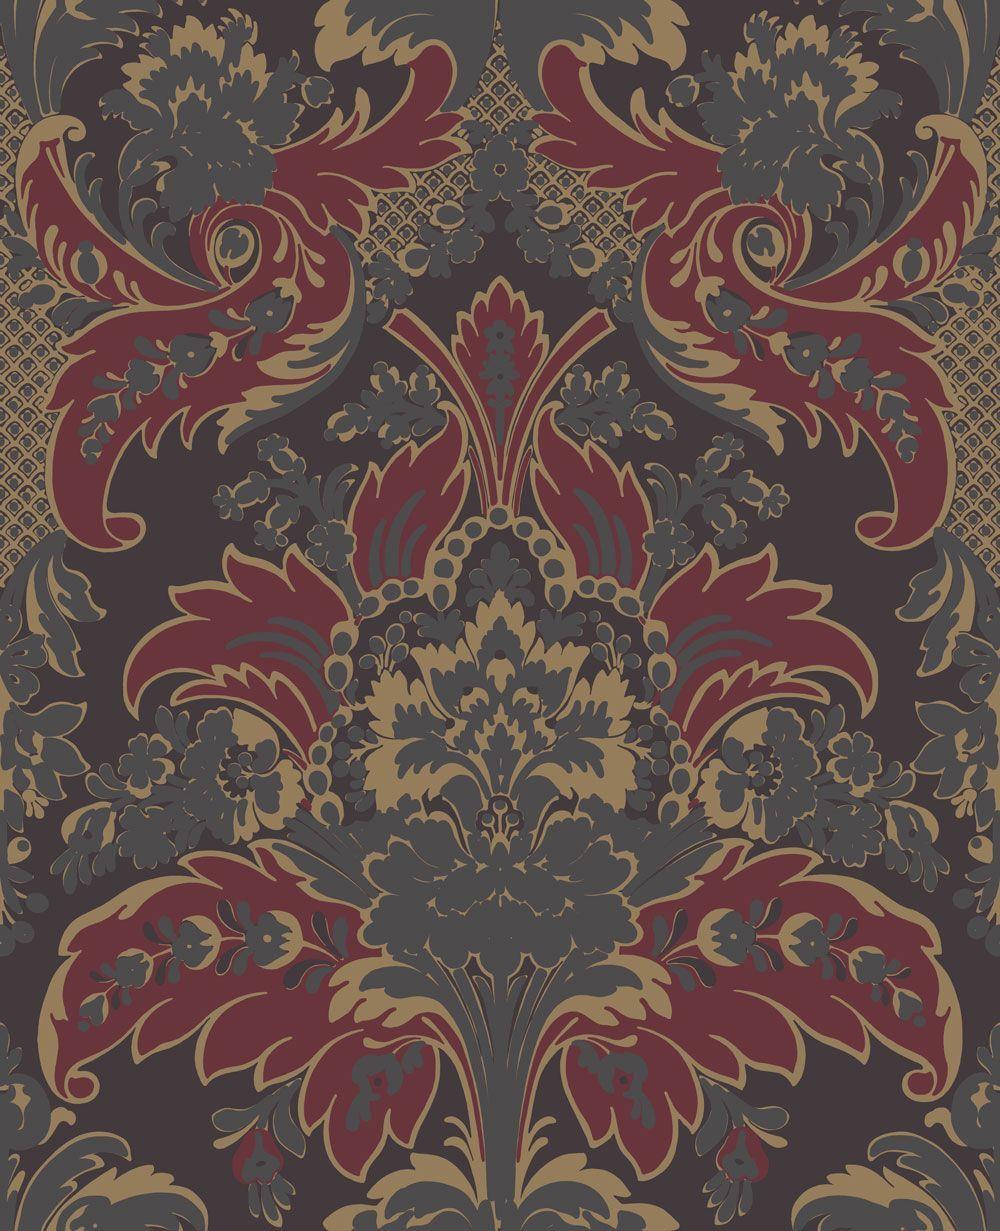 Aldwych Red / Gold wallpaper by Cole & Son. Decor: My New House